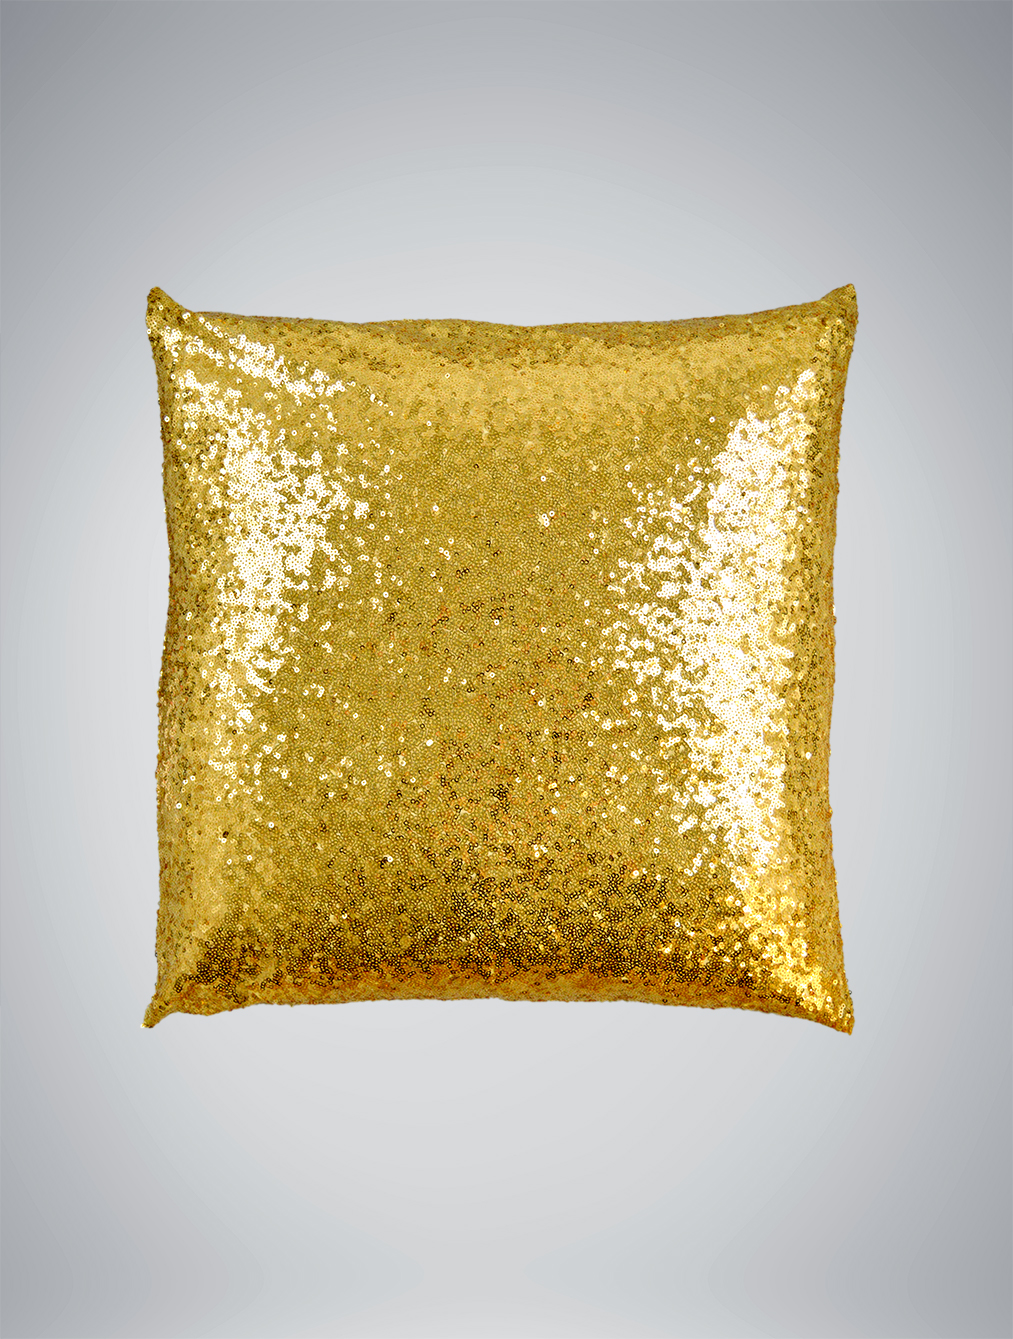 gold sequin pillows embroidered